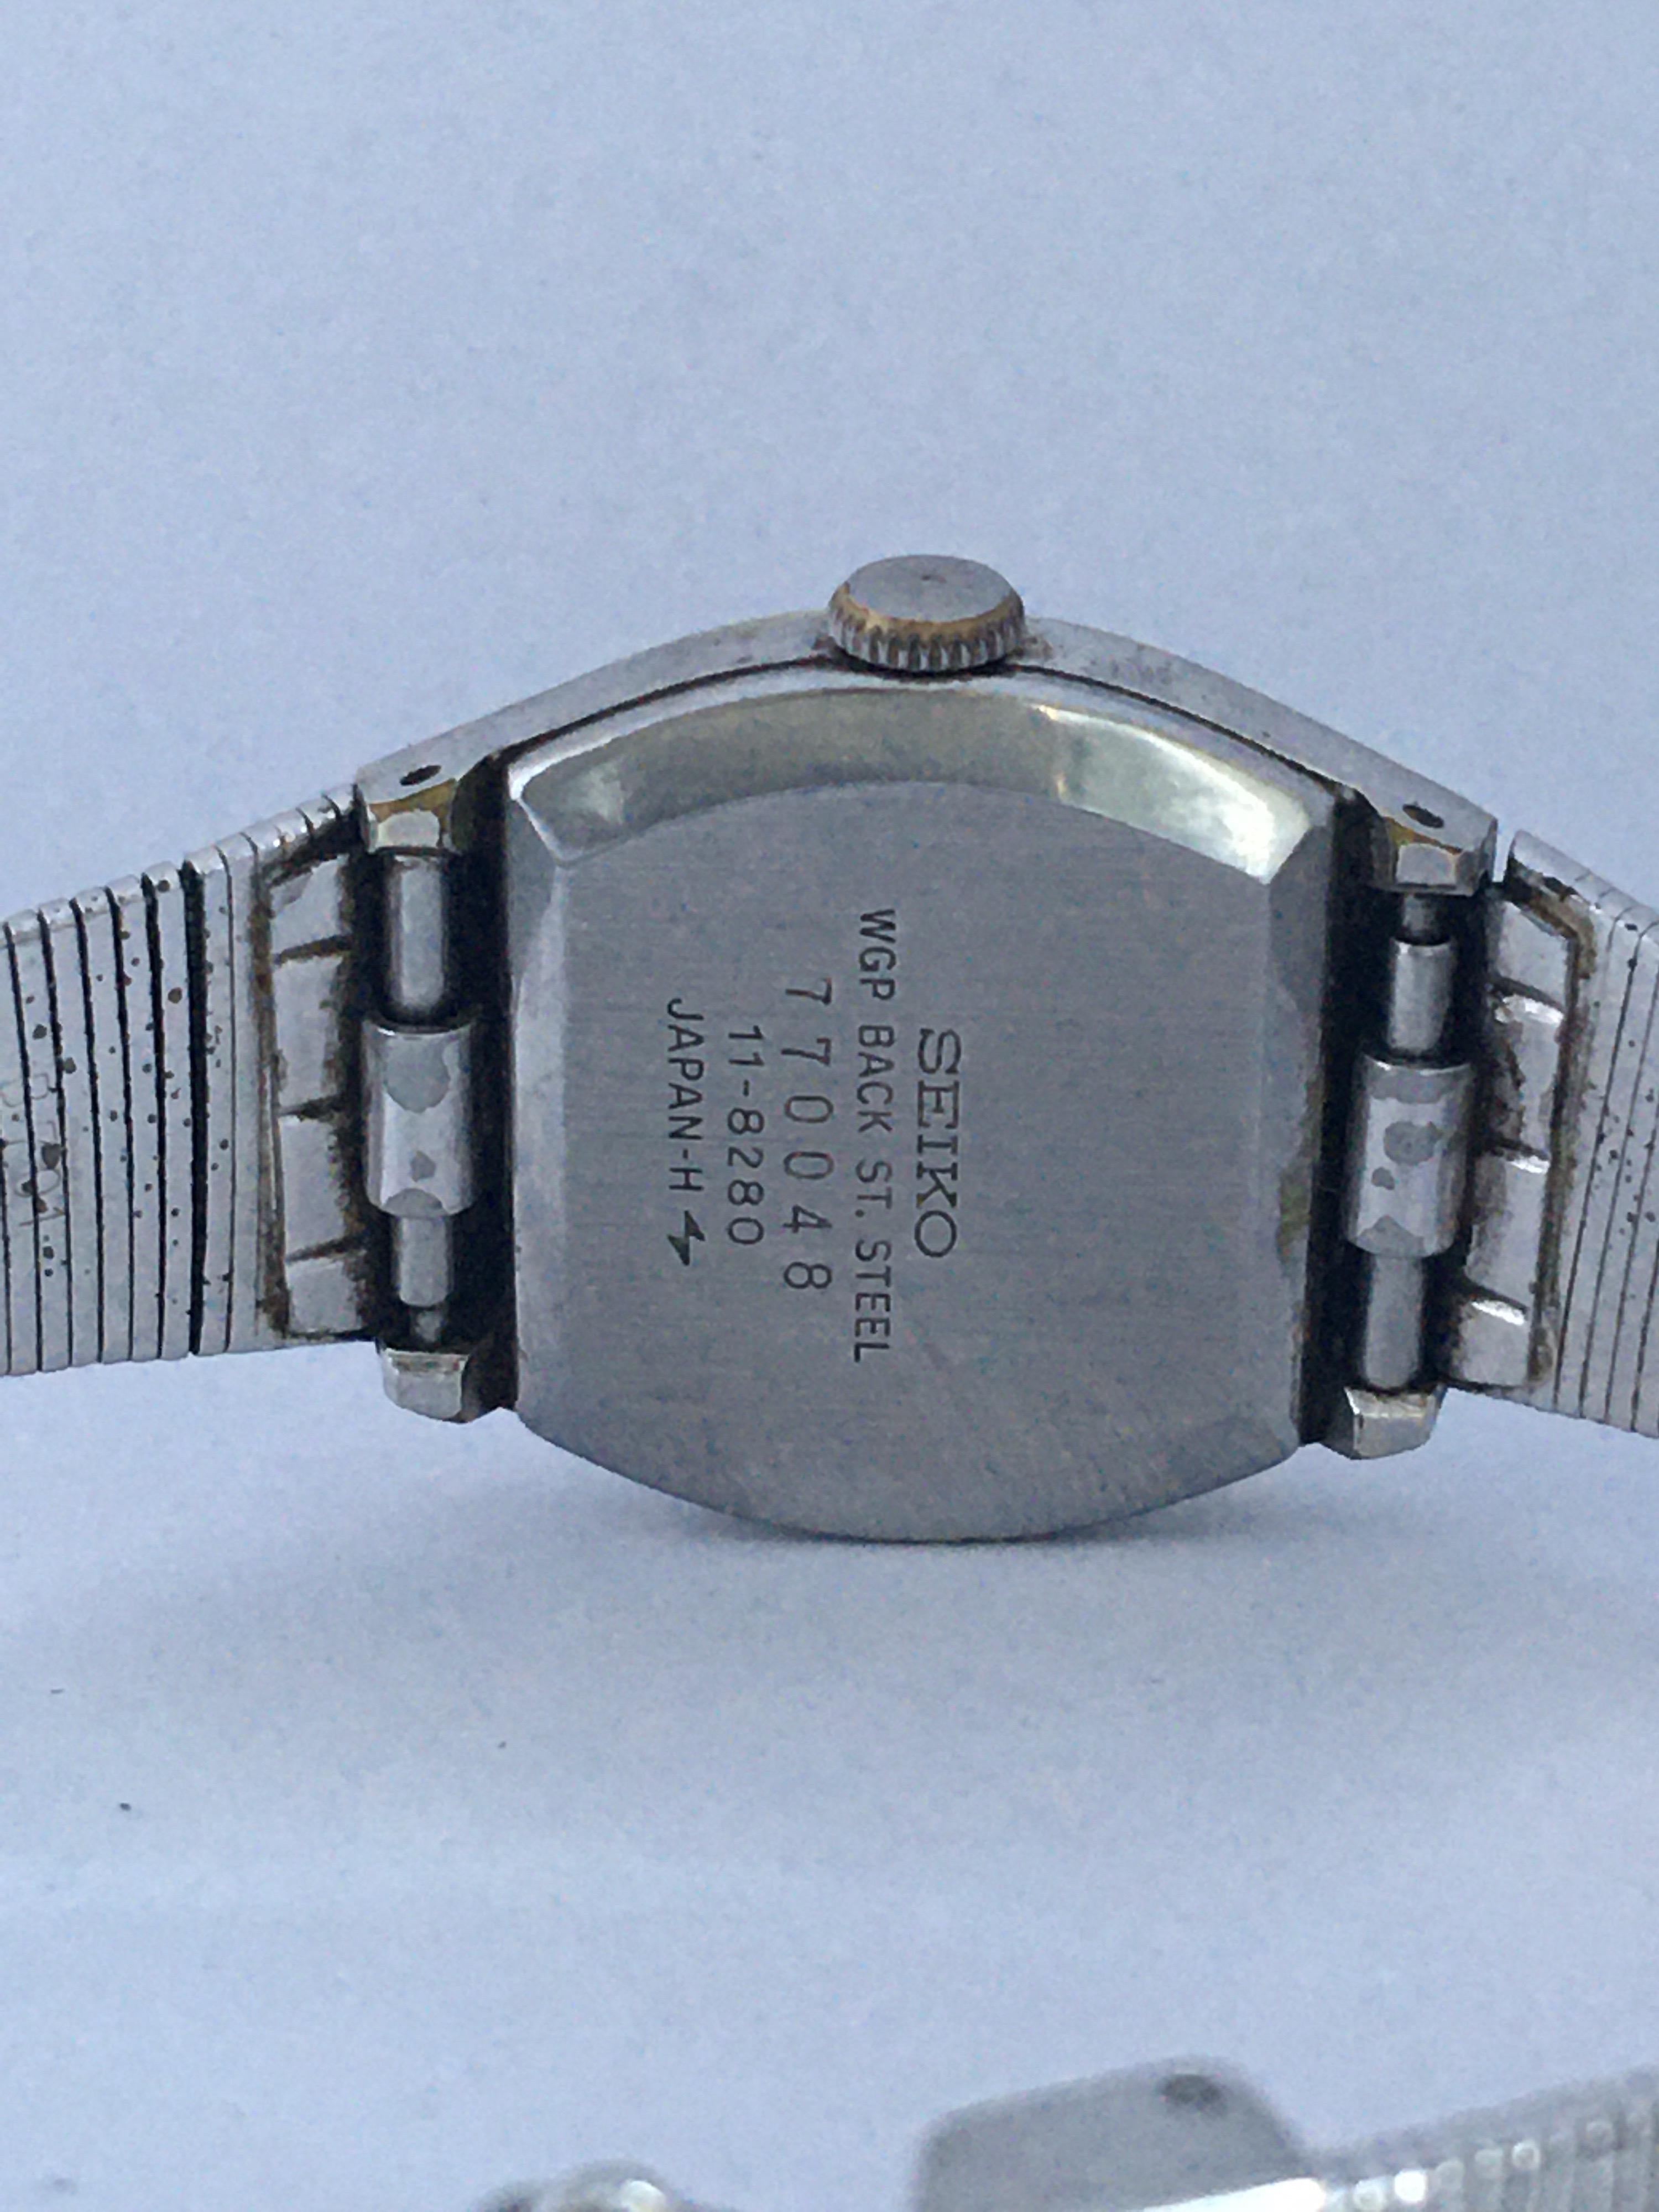 Vintage 1980s Seiko Mechanical Ladies Watch For Sale at 1stDibs | old seiko  ladies watches, seiko vintage women's watches, seiko women's watches vintage